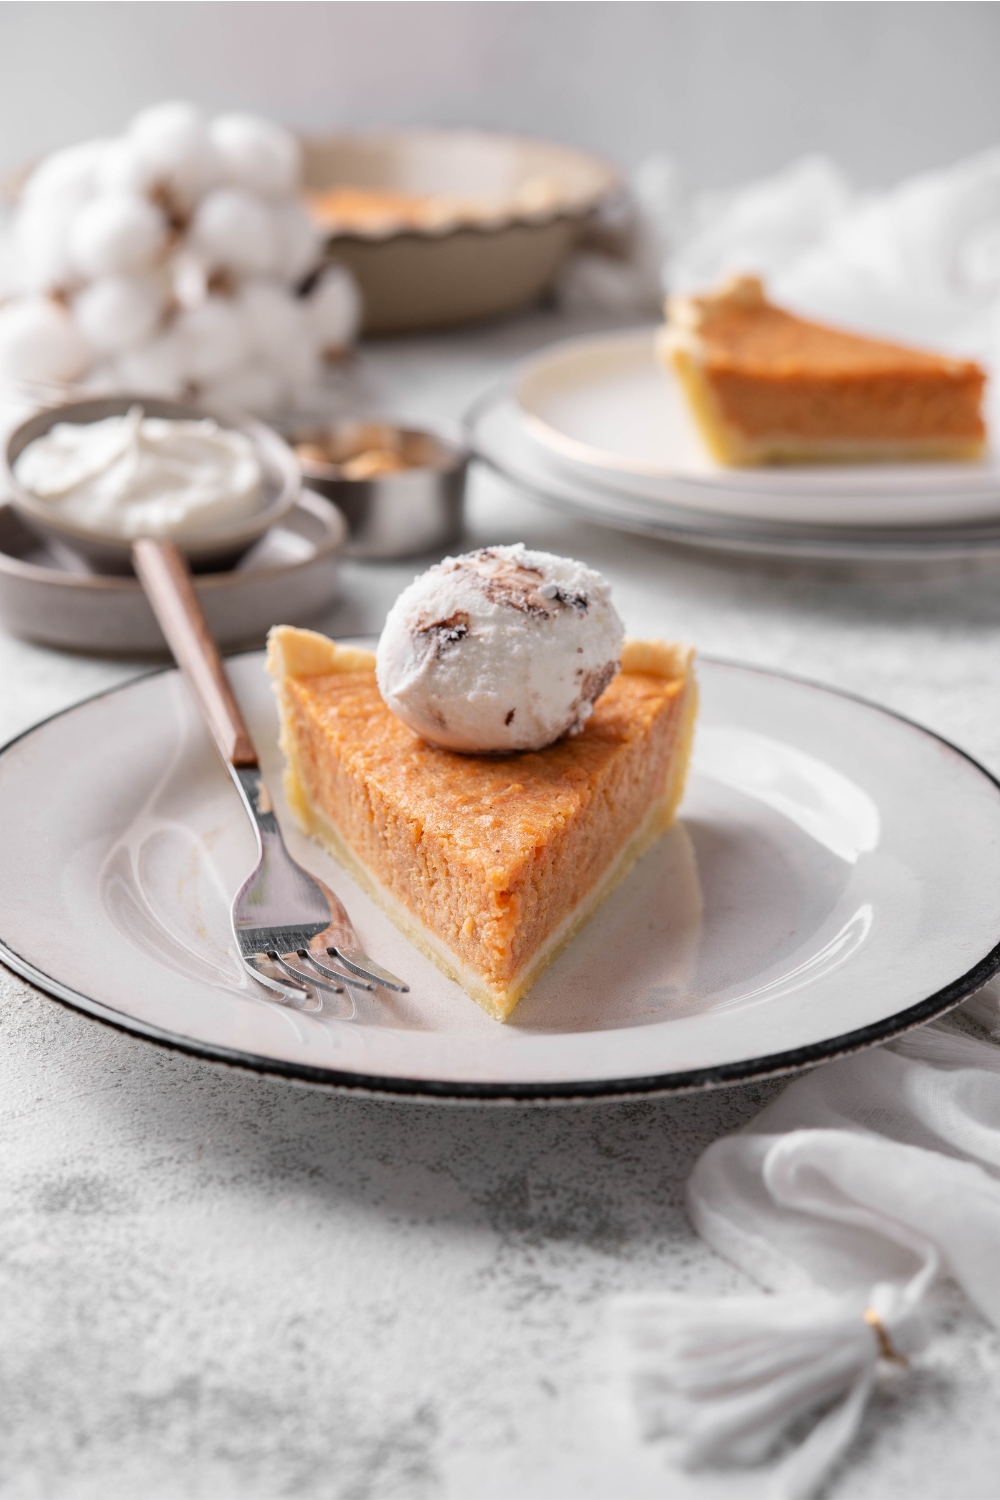 A slice of sweet potato pie on a plate with a dollop of whipped cream on top and a fork on the plate next to it.